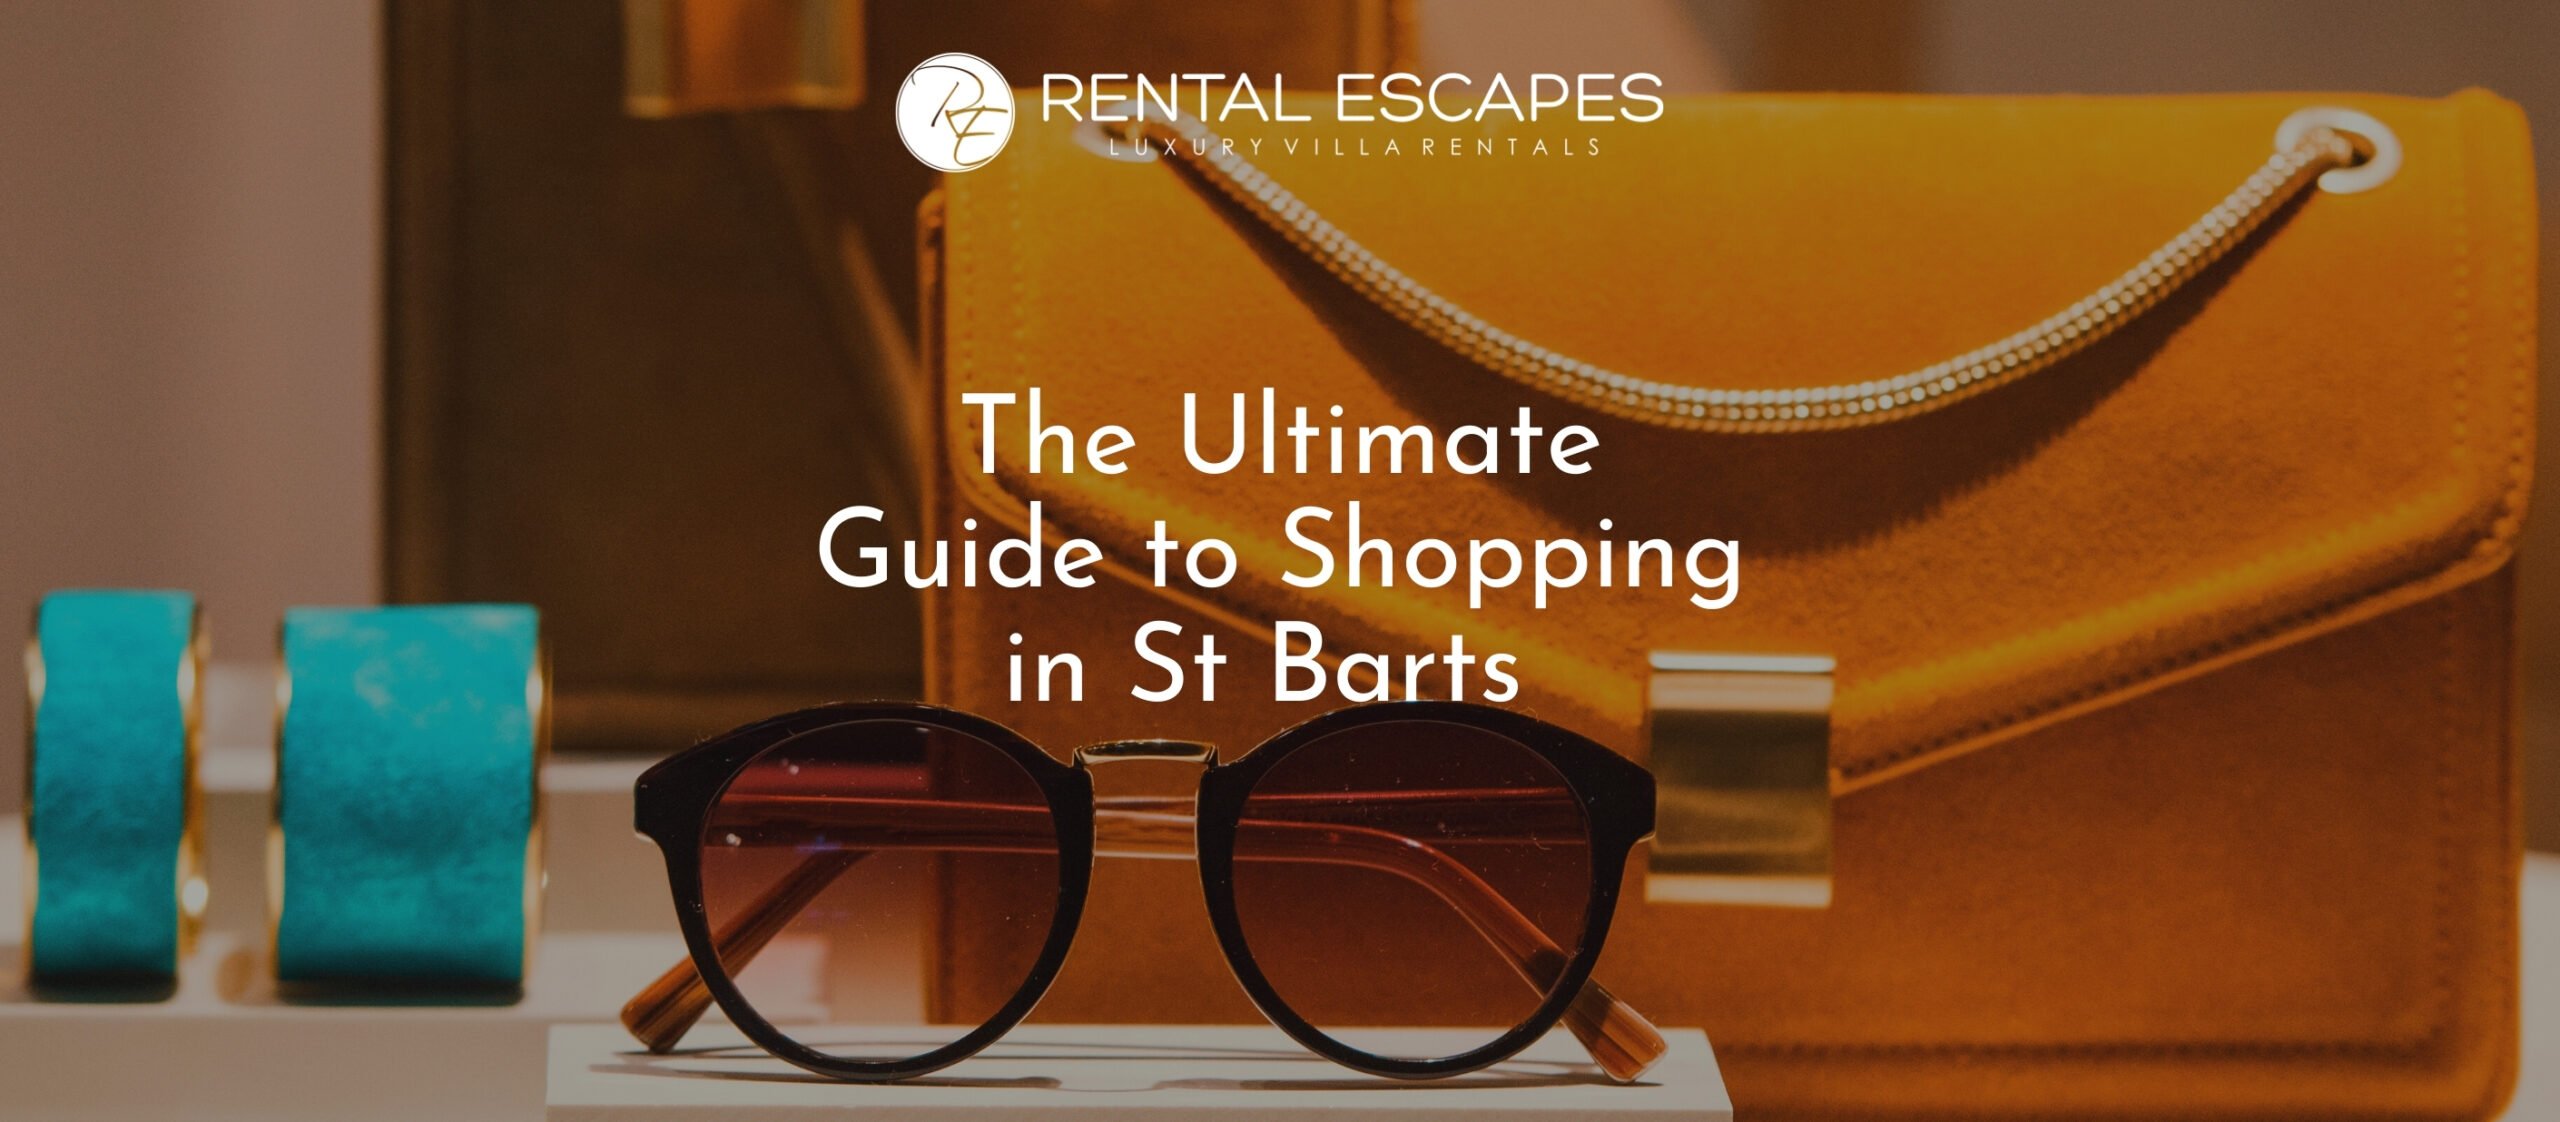 The best places to shop in St Barth's